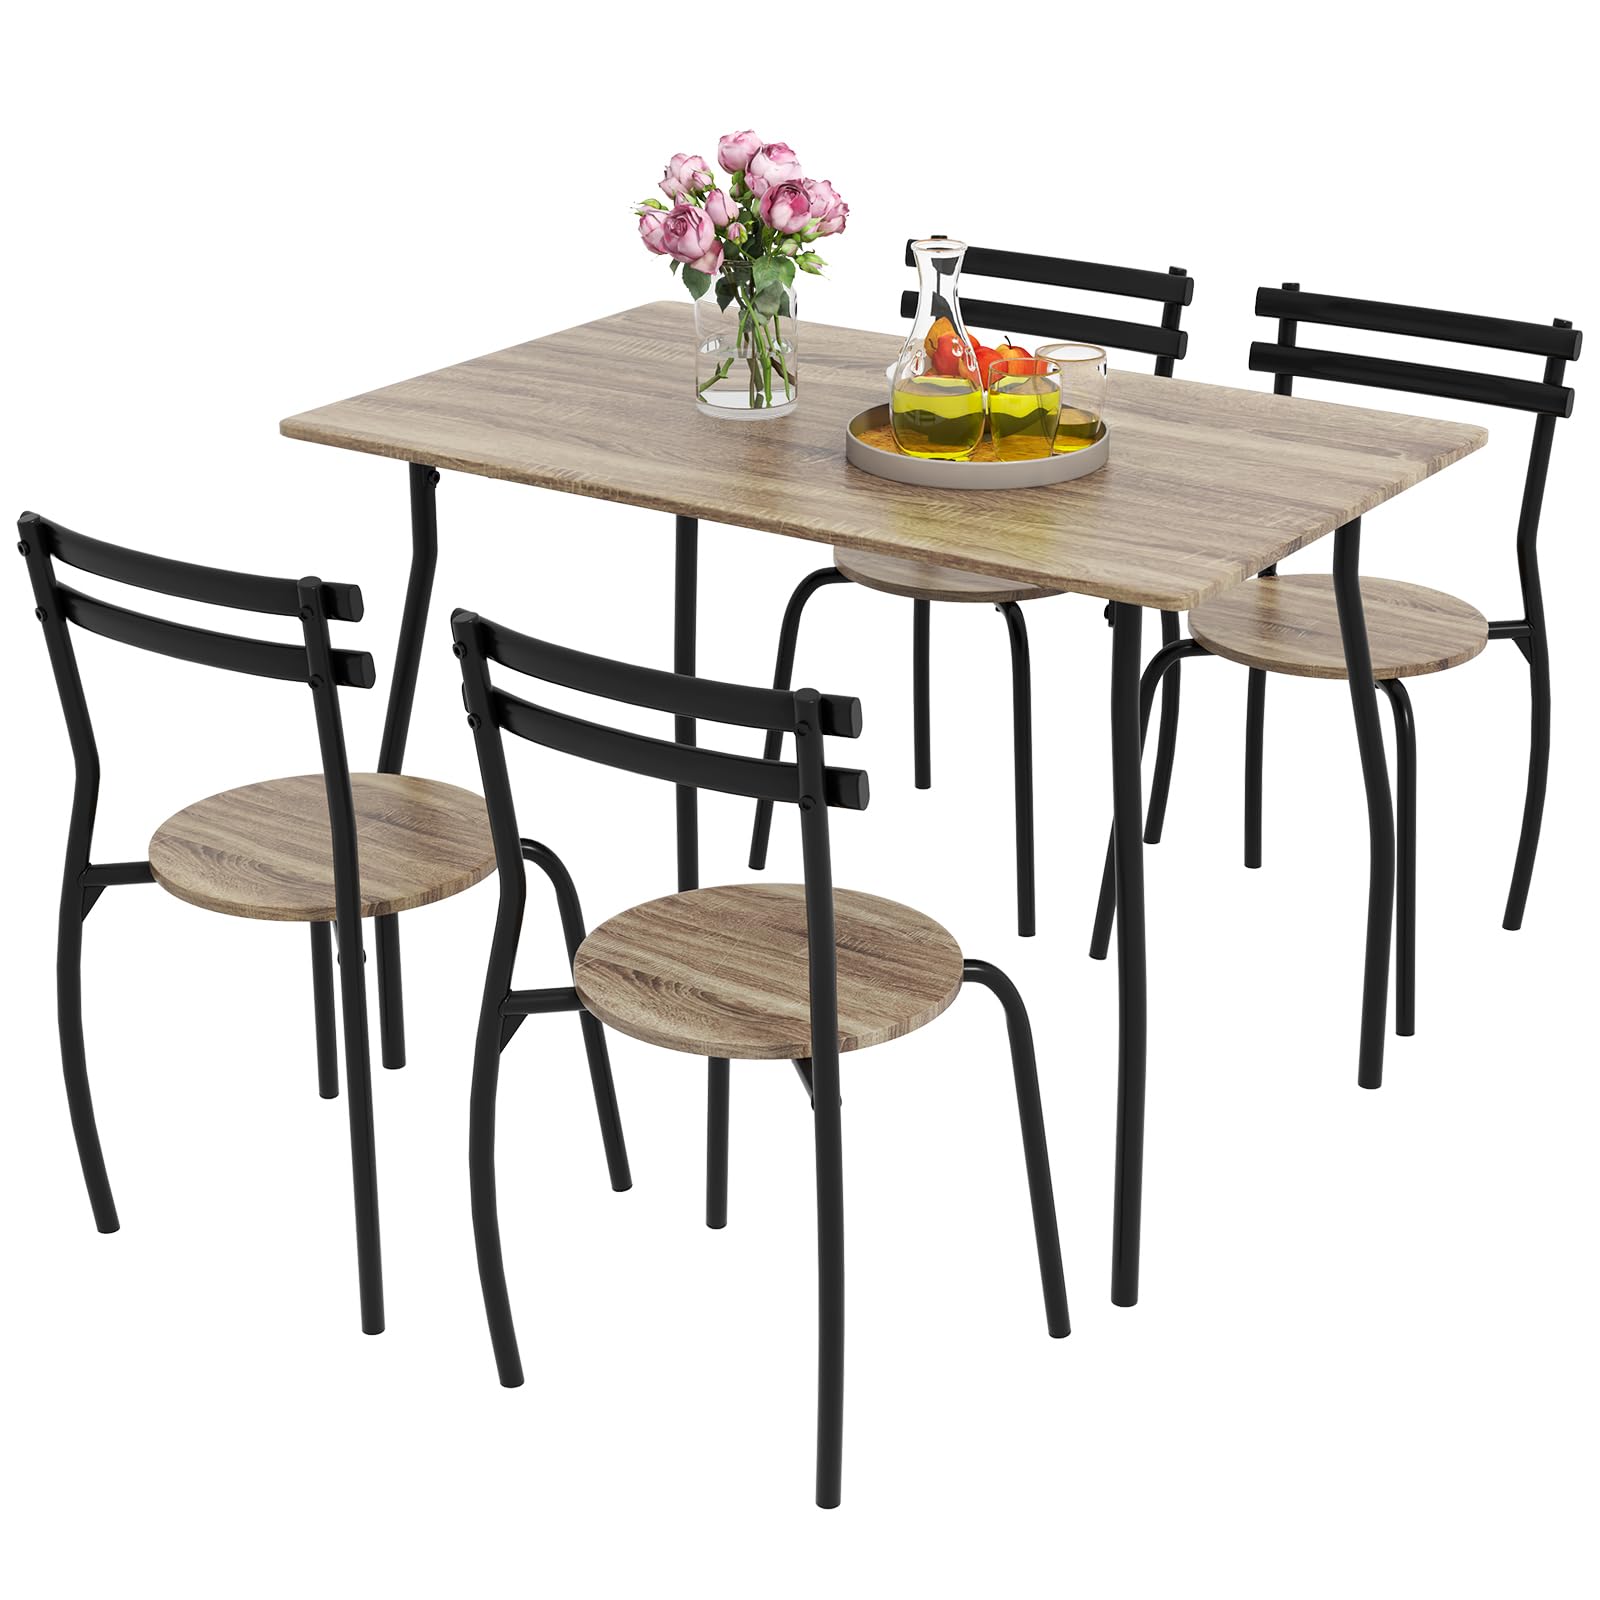 Giantex 5-Piece Dining Table Set - Modern Rectangular Dining Table & 4 Armless Chairs with Metal Frame